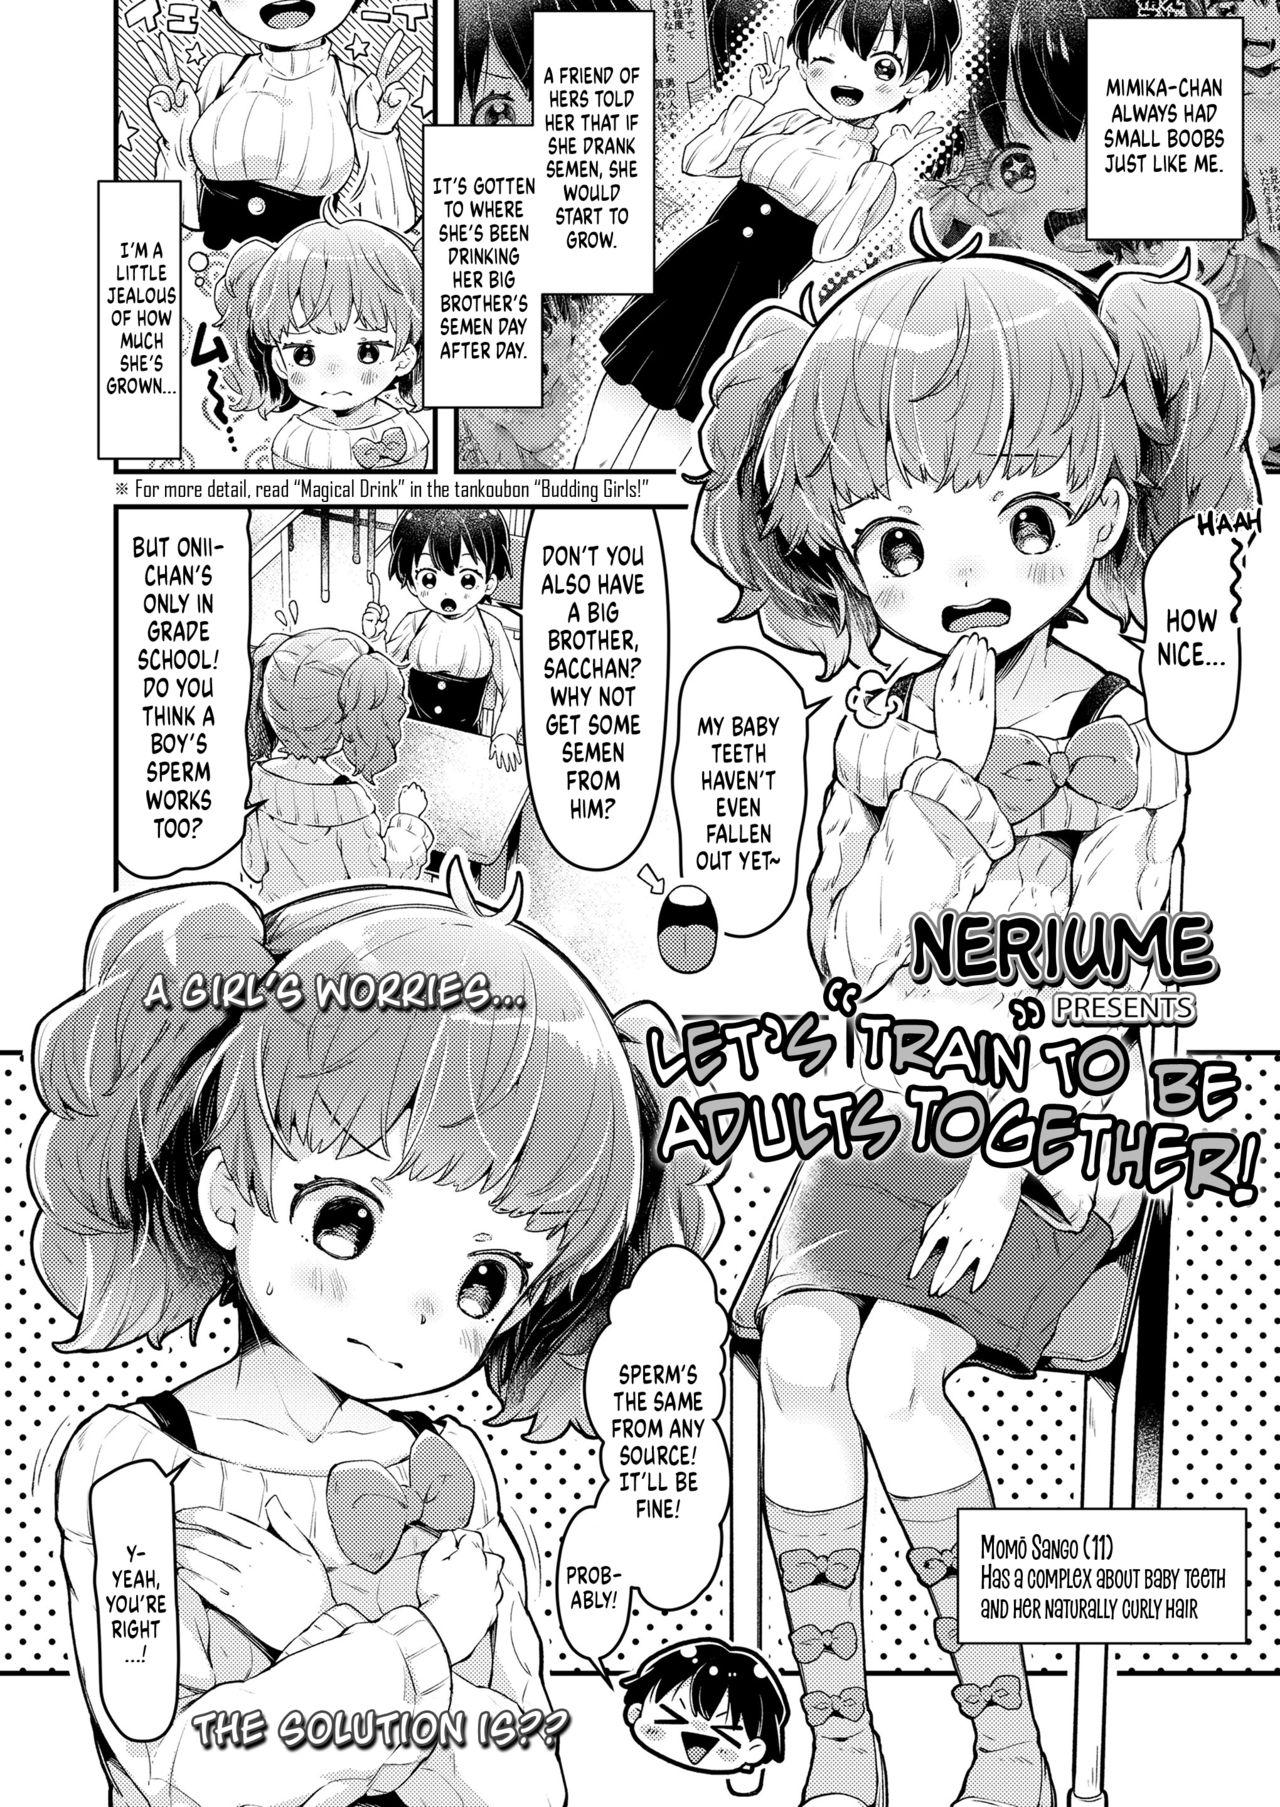 Daddy Issho ni Otona Training! | Let's Train to be Adults Together! Amatures Gone Wild - Page 2